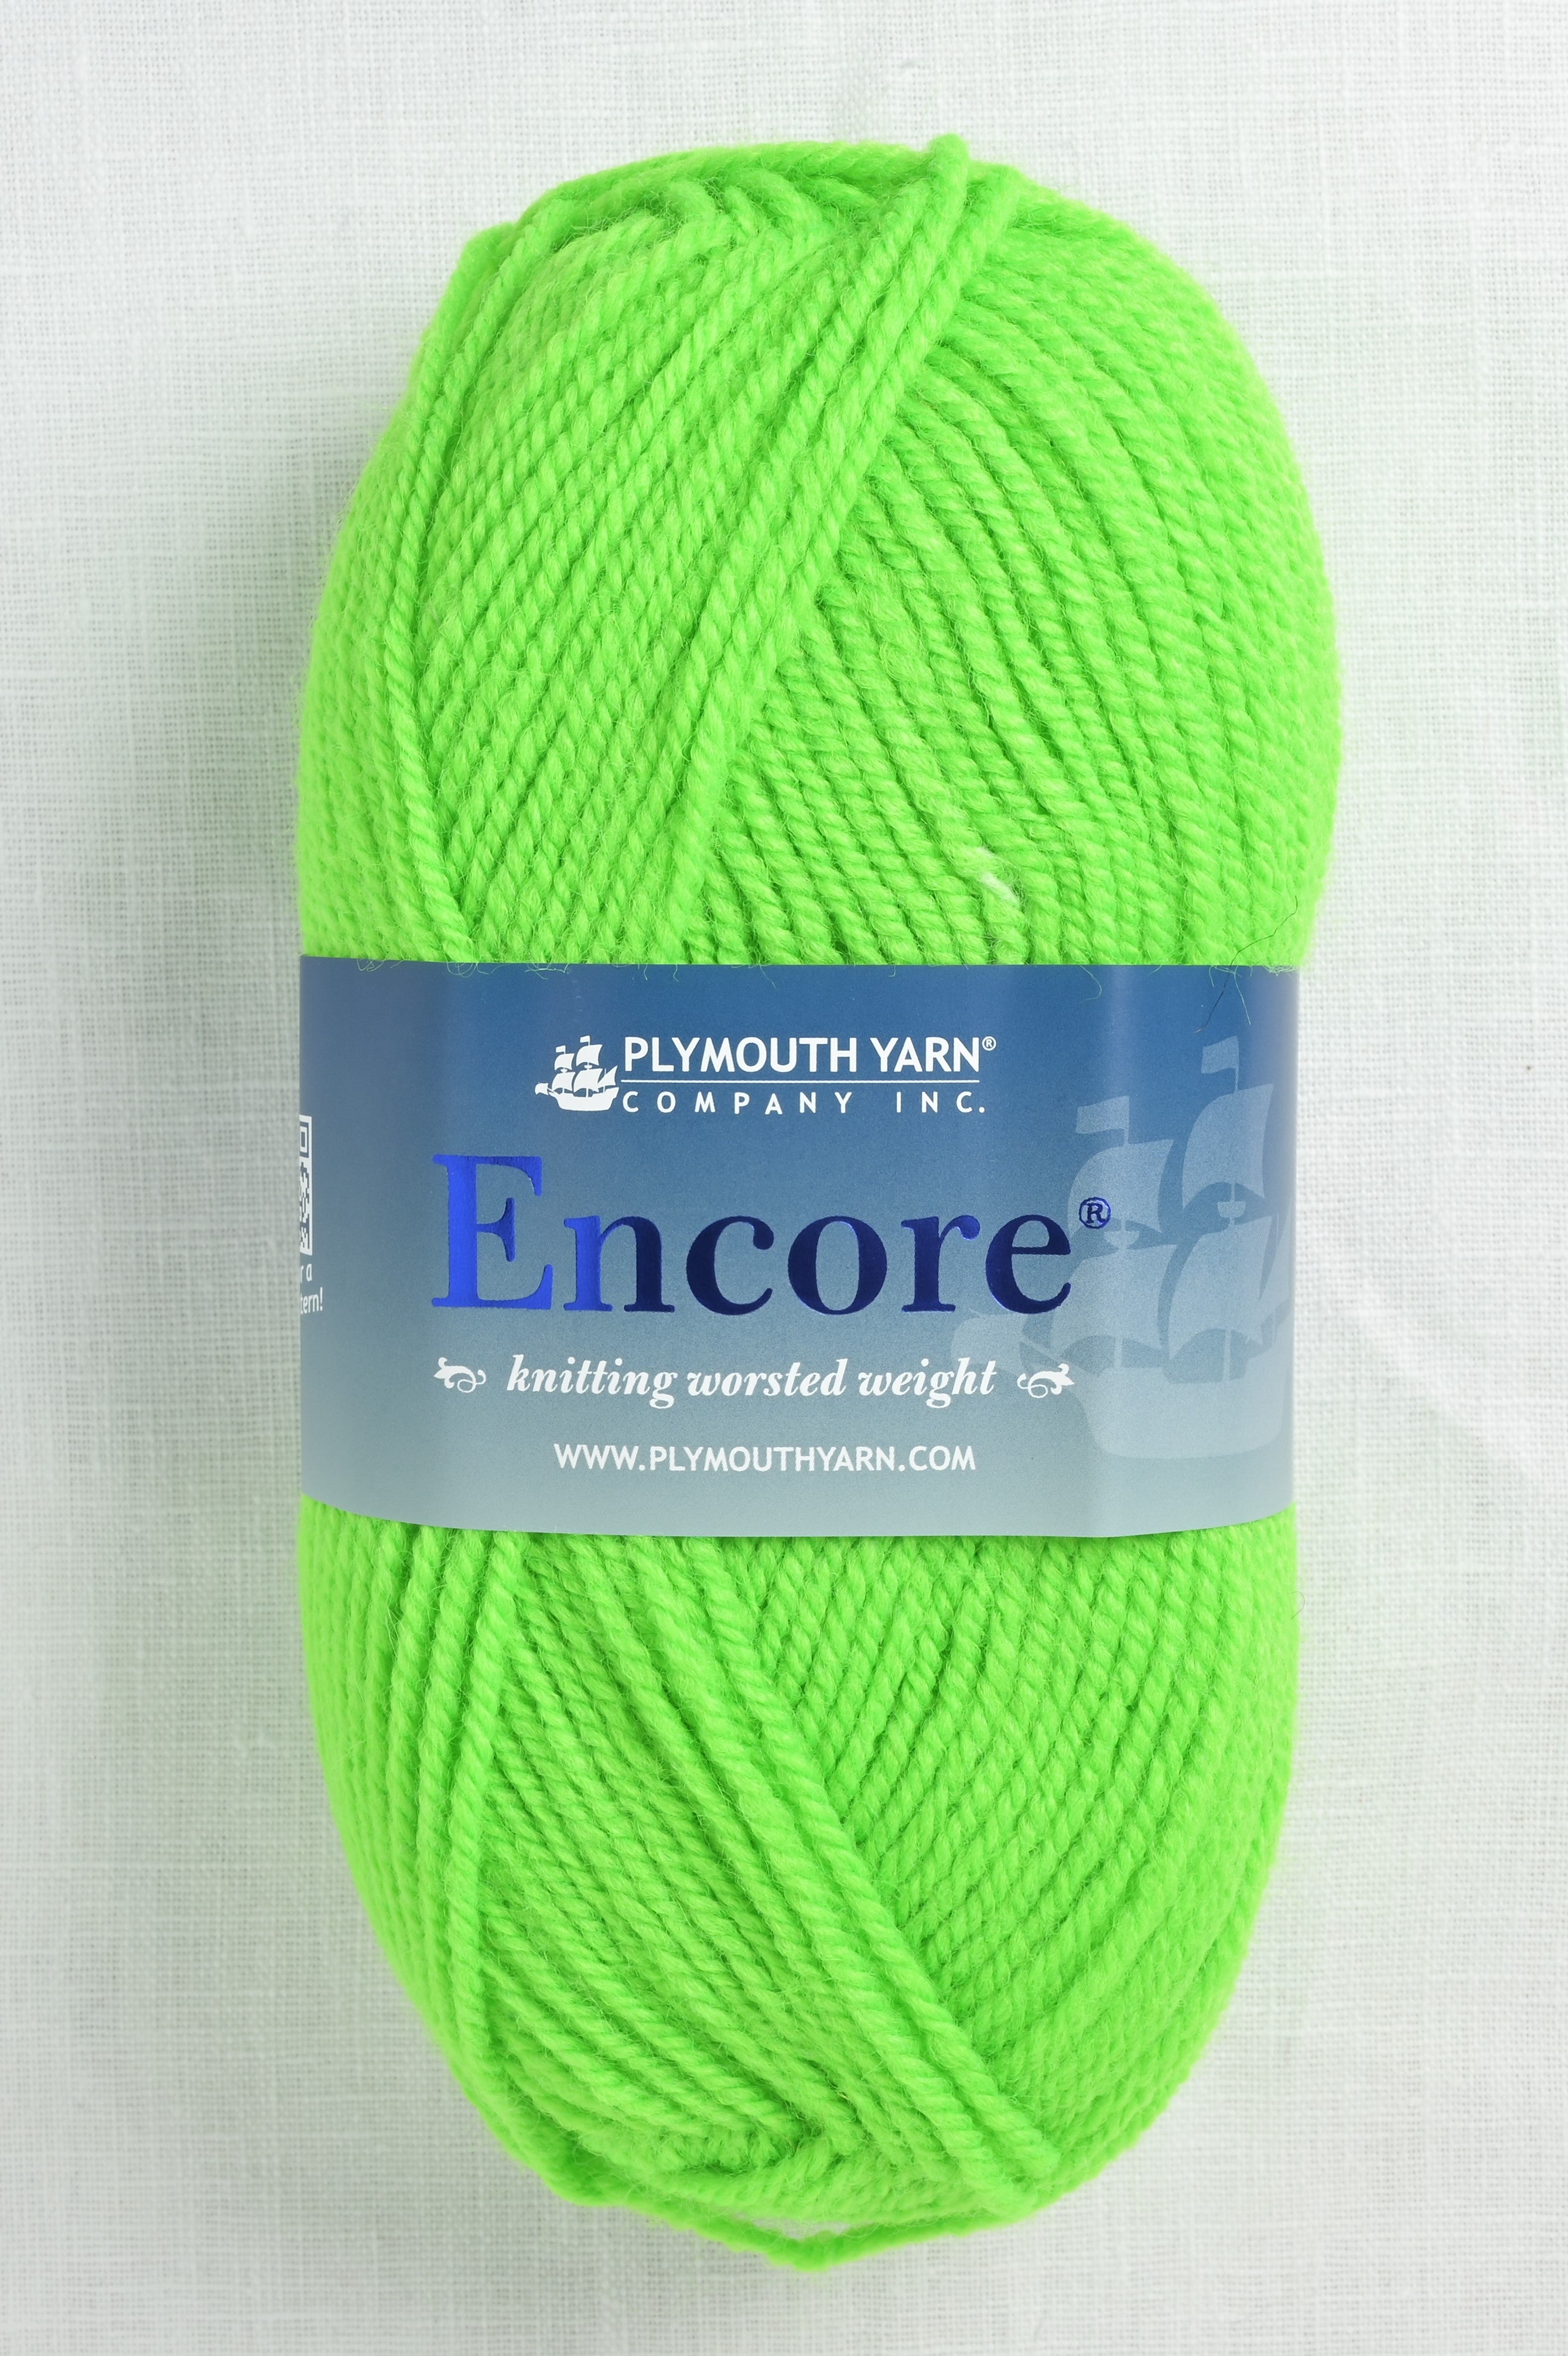 Plymouth Yarn Encore Worsted Yarn - 0054 Christmas Green at Jimmy Beans Wool